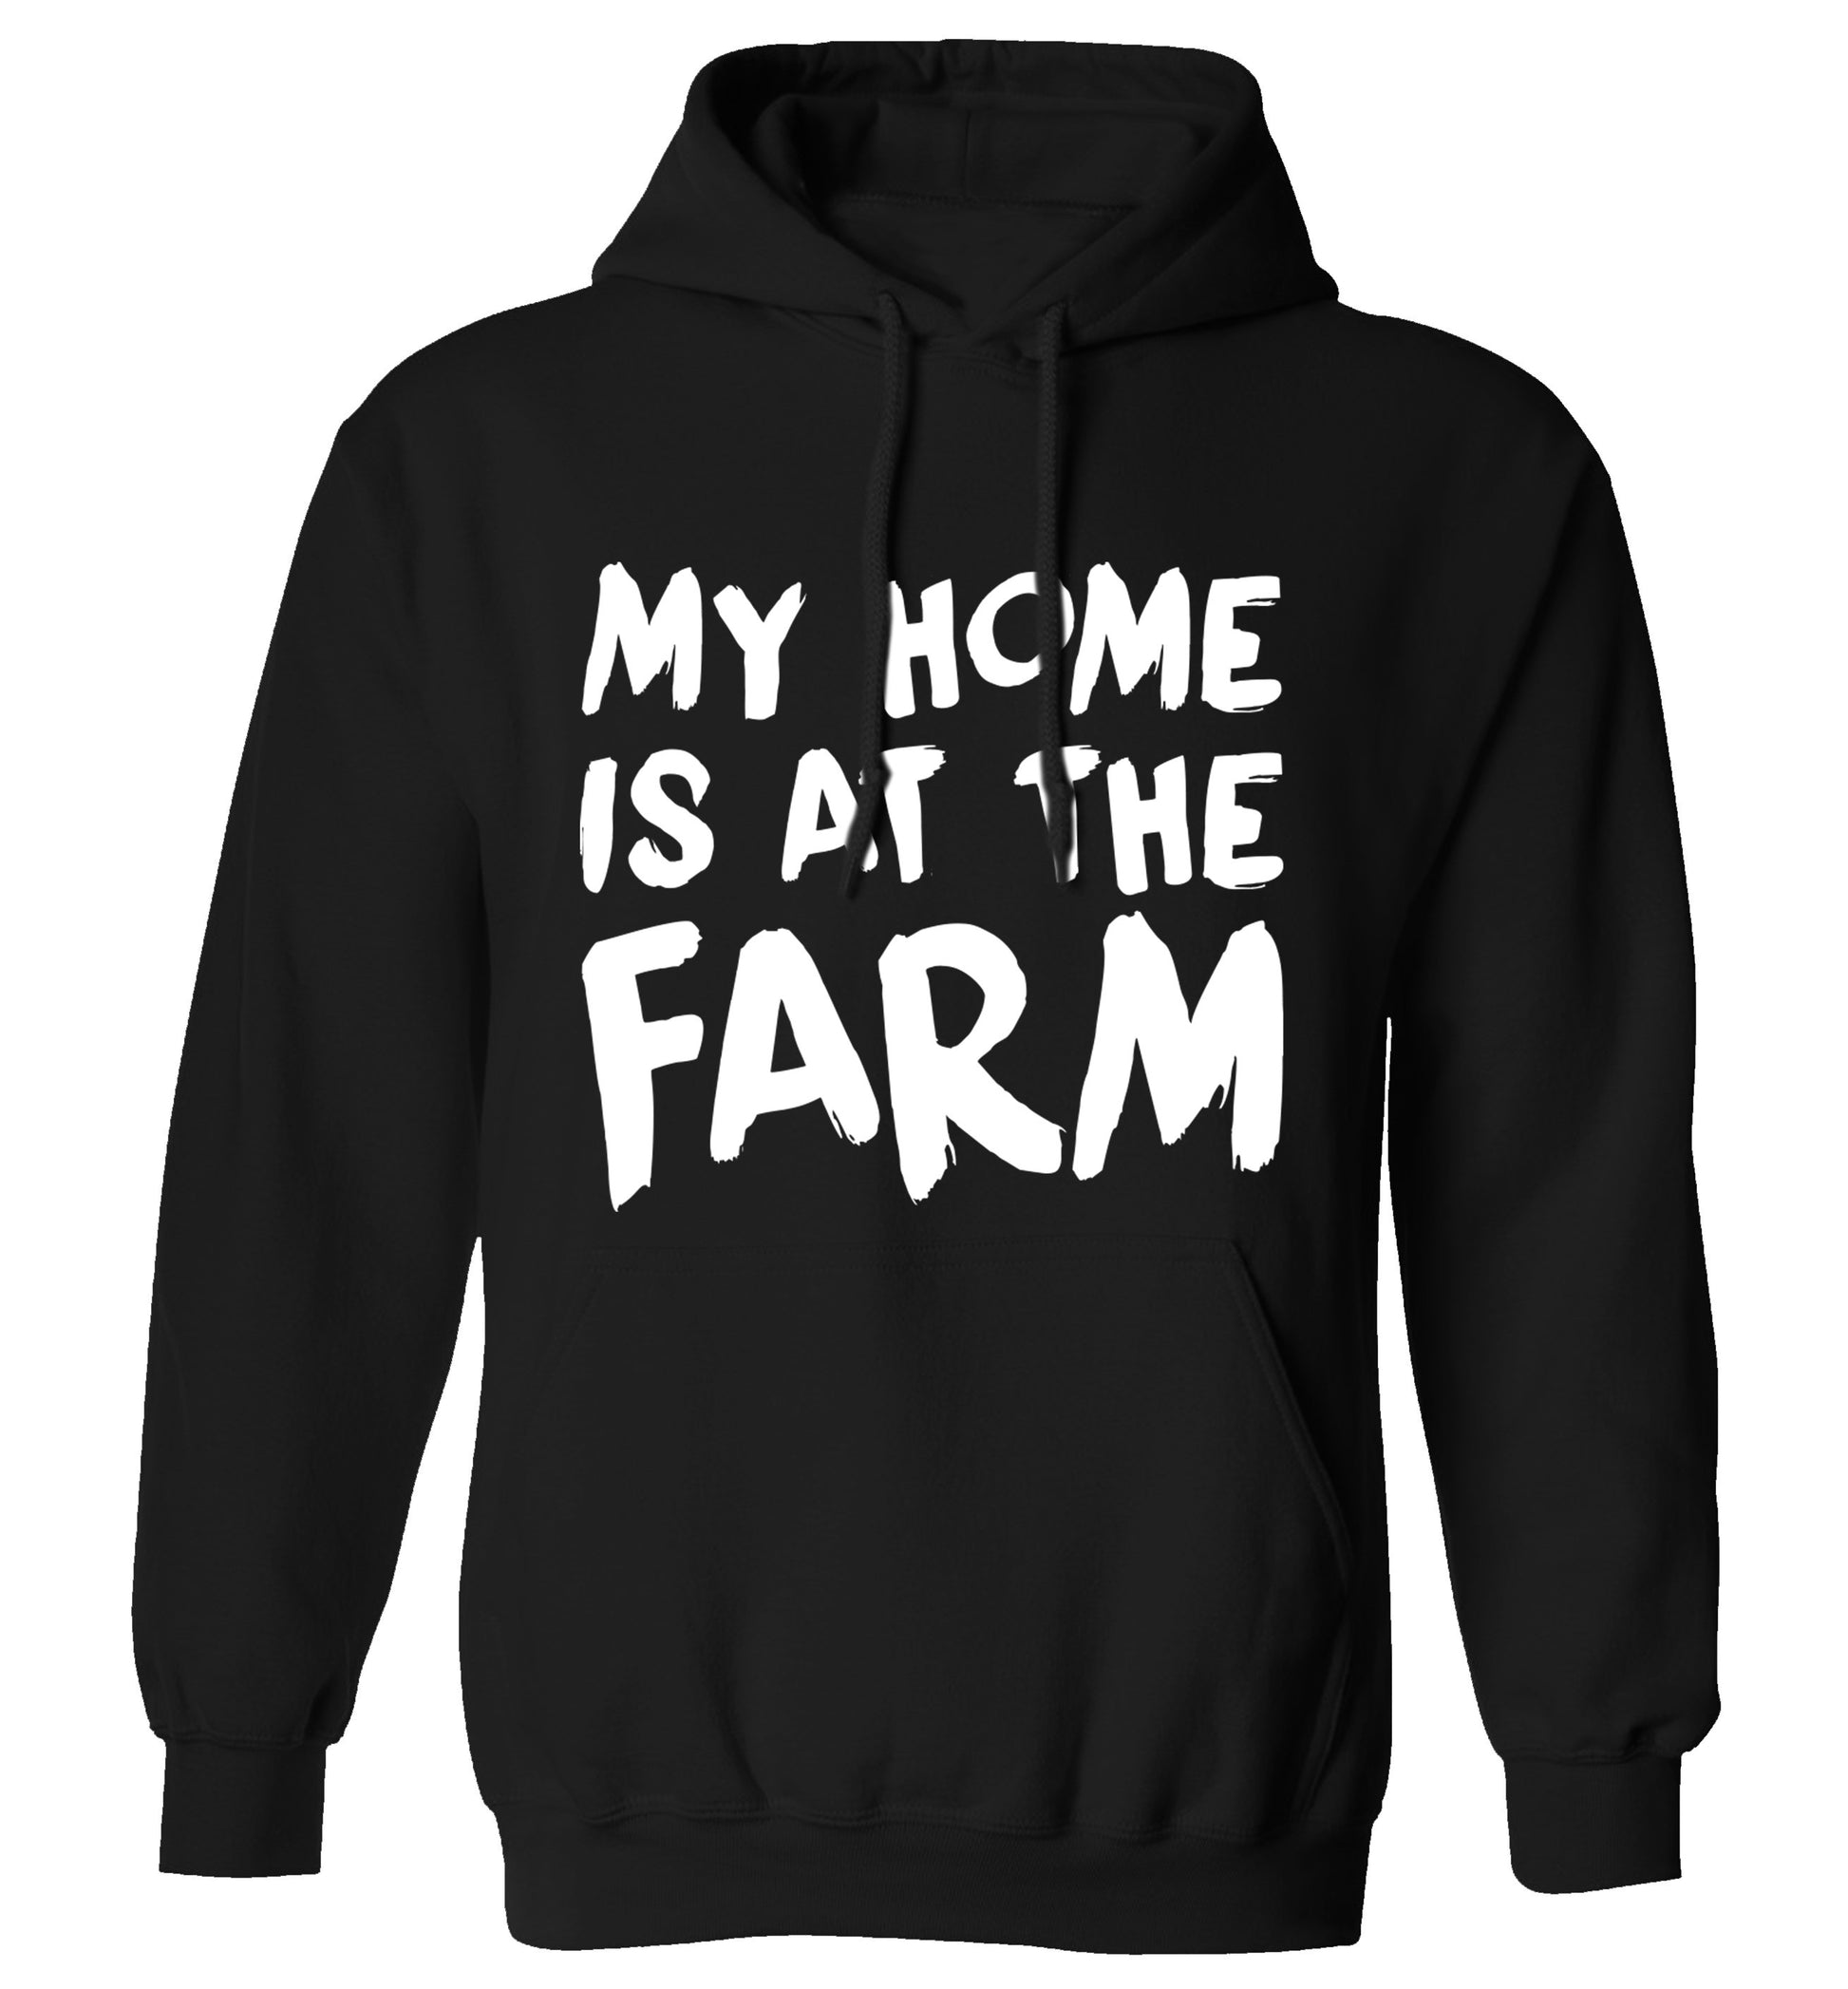 My home is at the farm adults unisex black hoodie 2XL